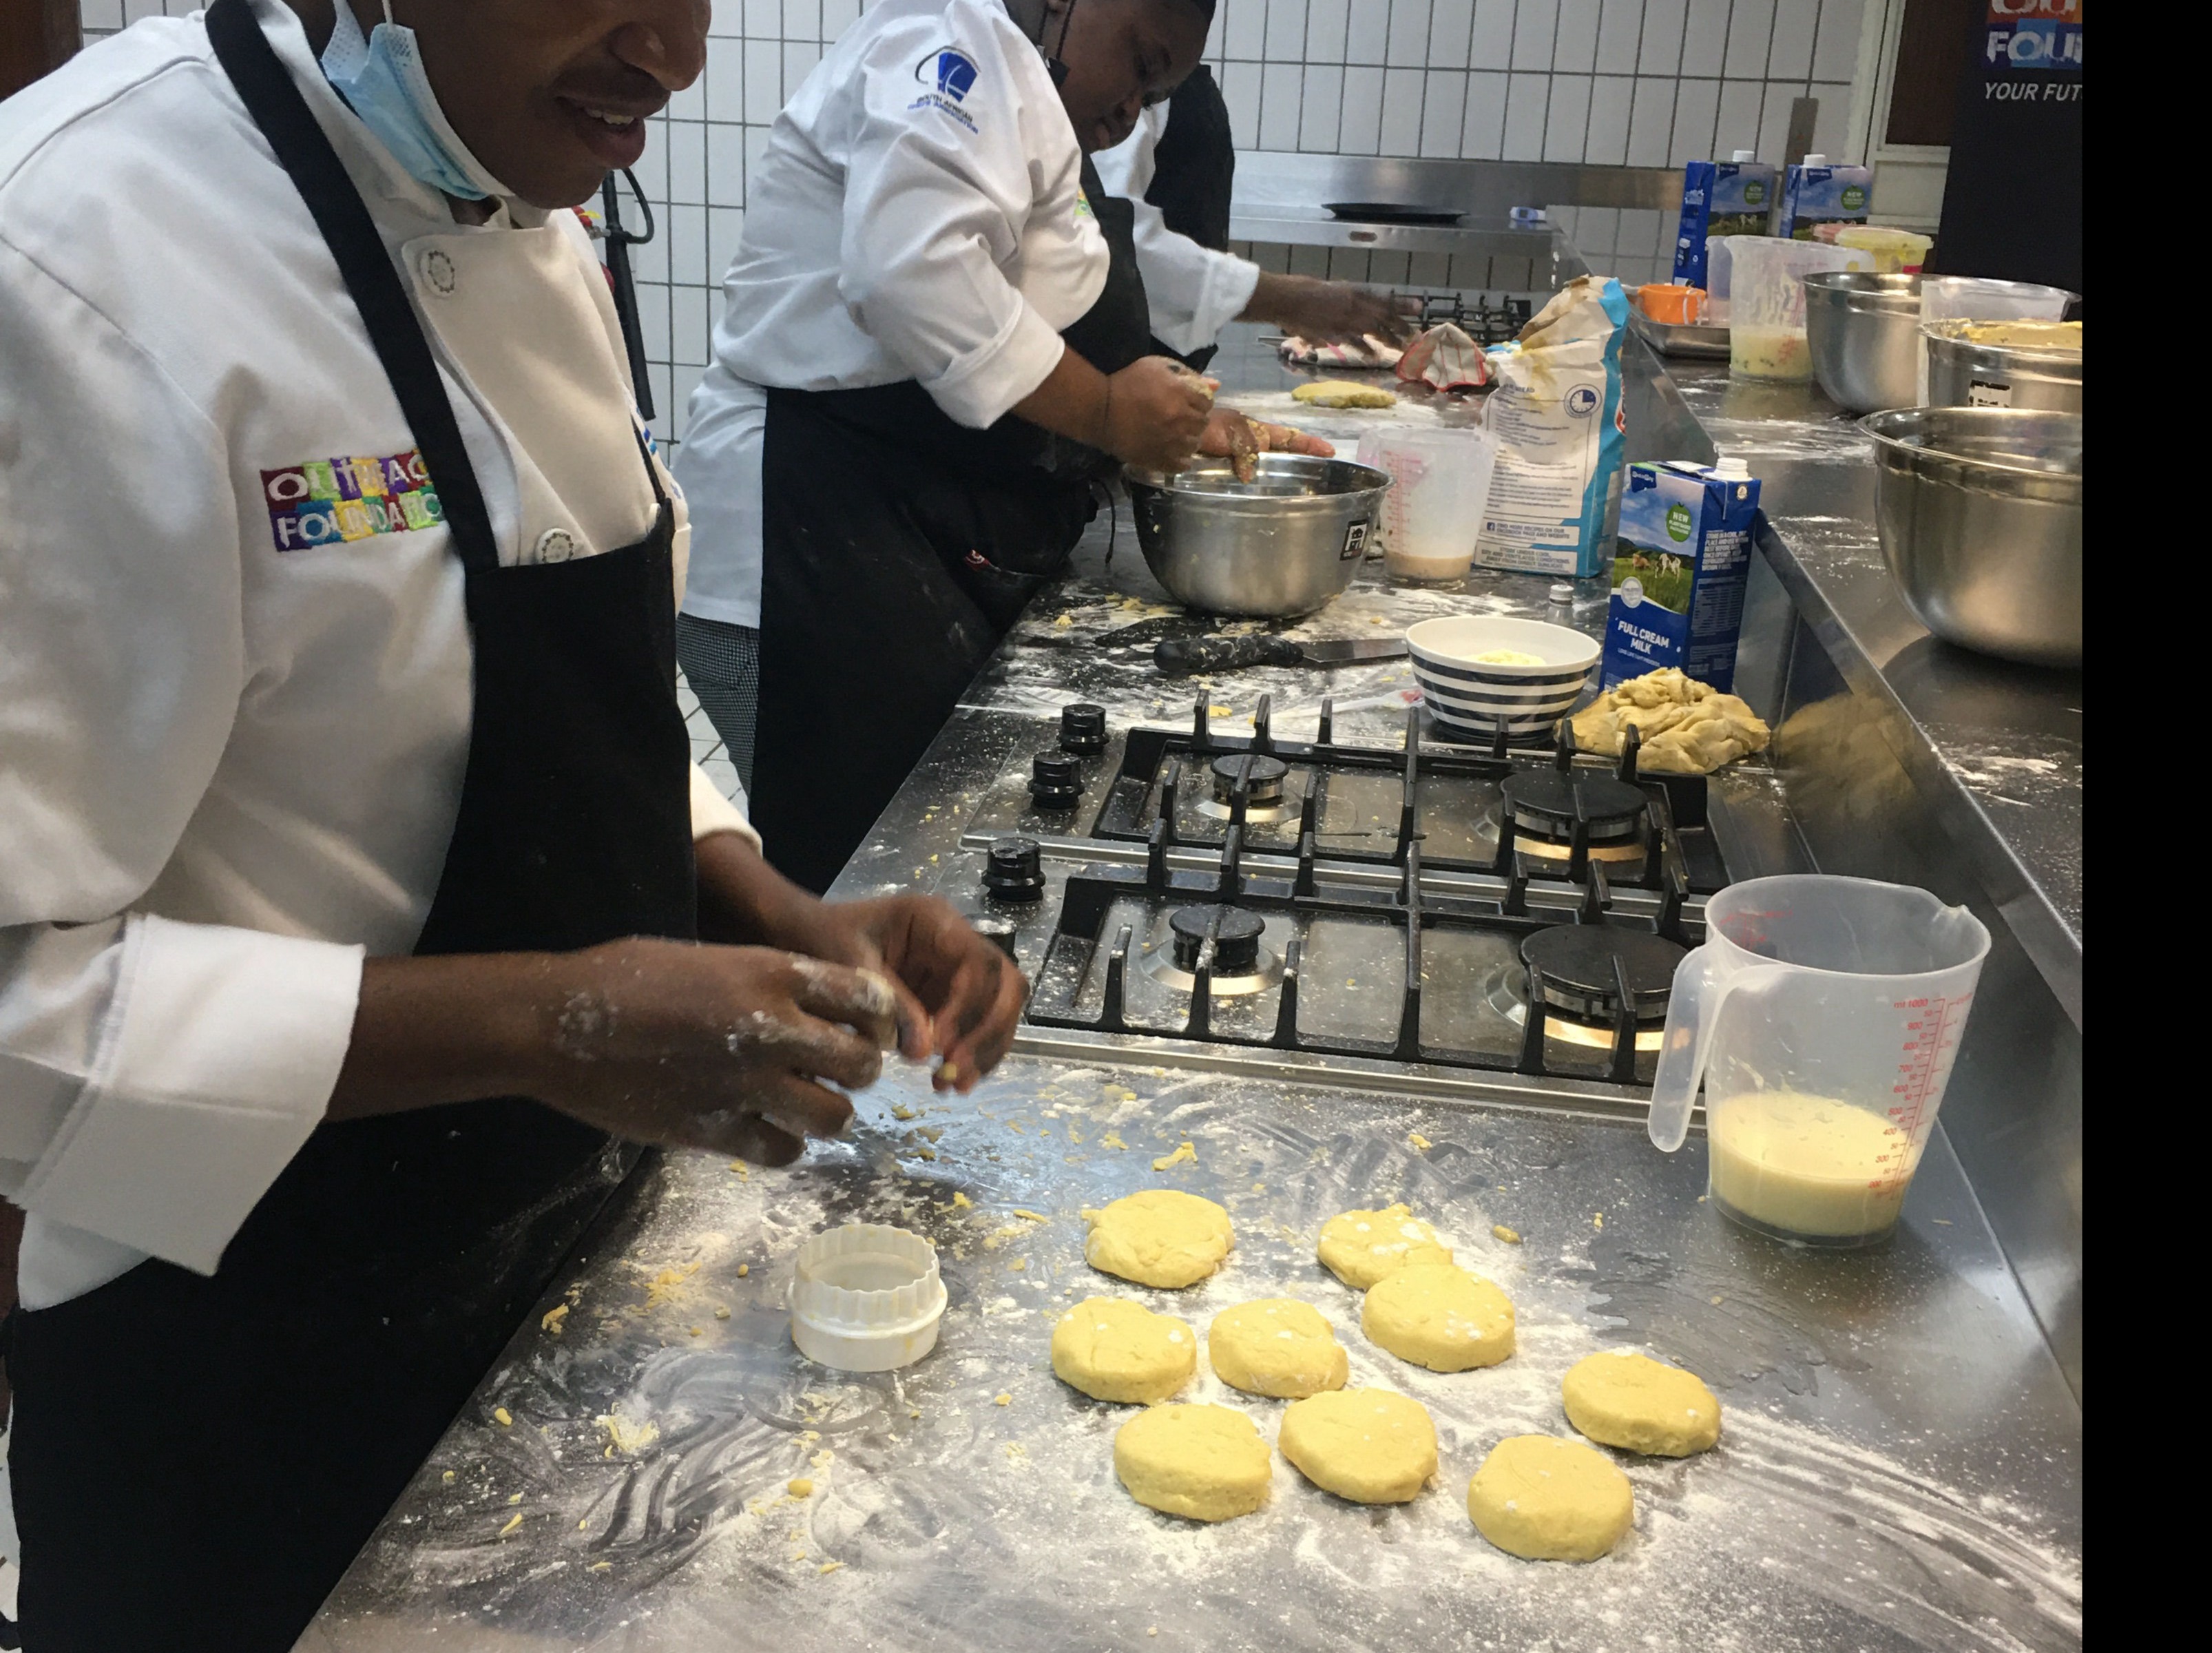 Students busy in the Outreach Foundation teaching kitchen learning valuable baking skills